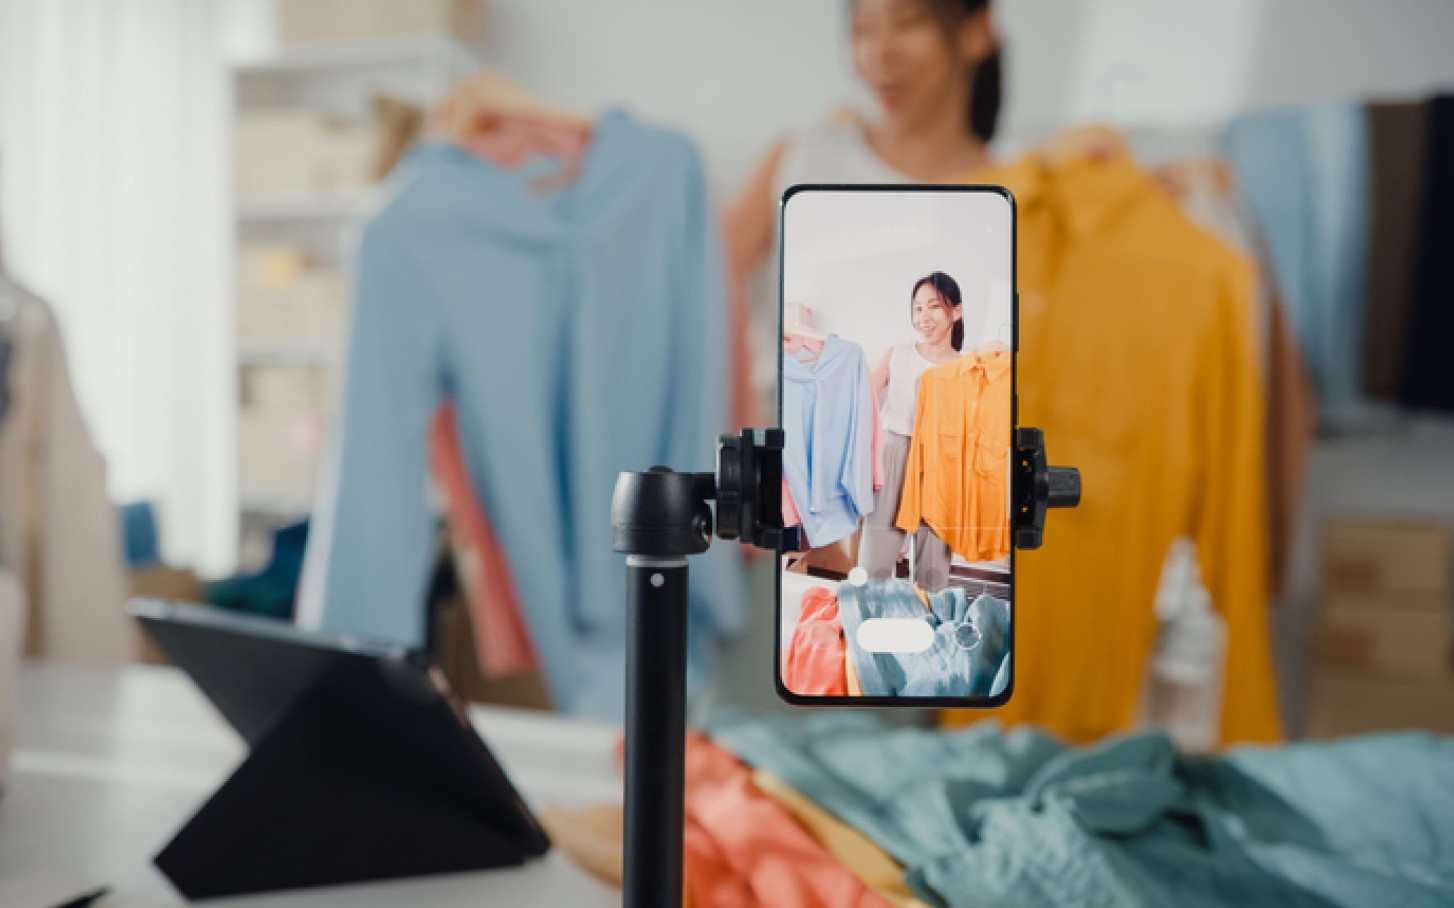 A woman is showing clothes online using a smart phone on a tripod